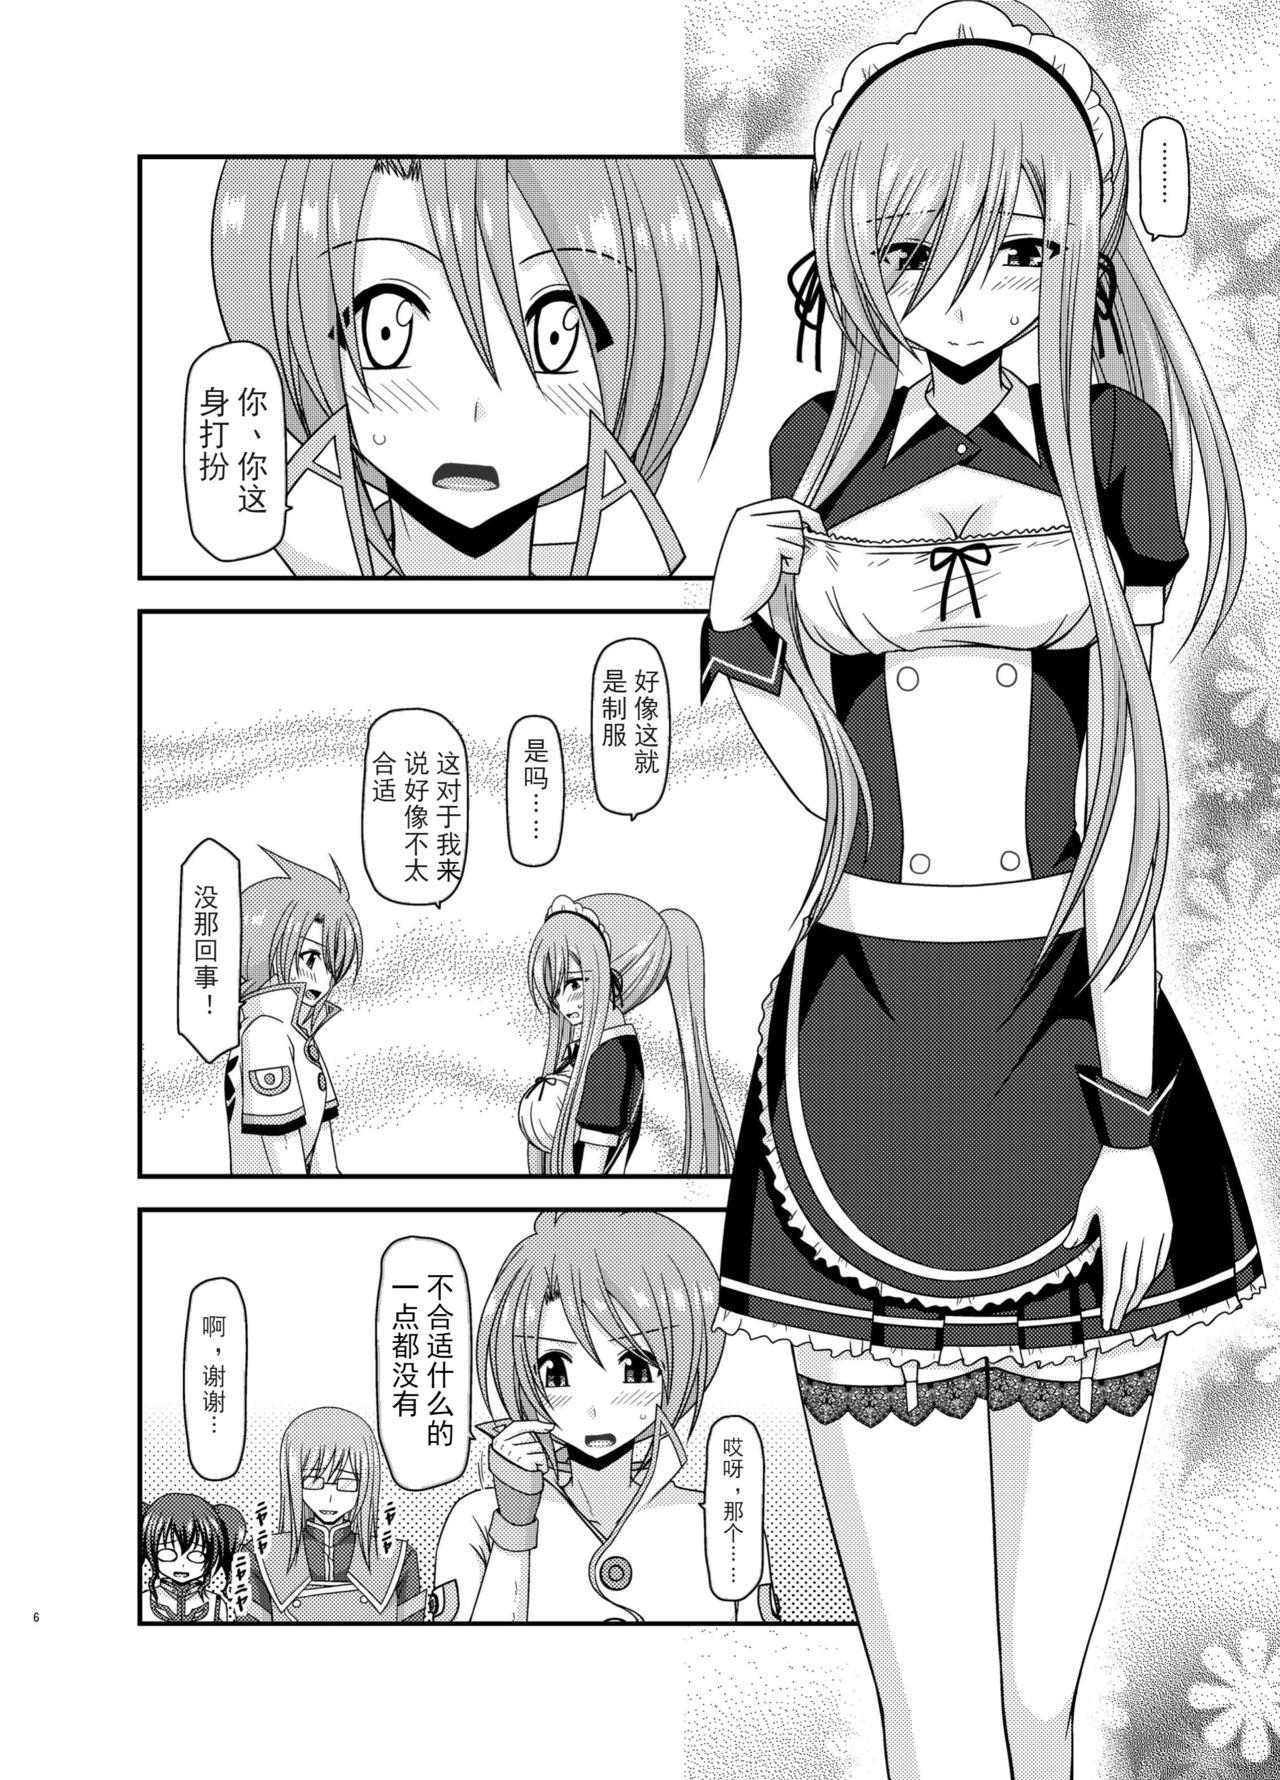 1080p Melon ga Chou Shindou! R13 - Tales of the abyss Jerking Off - Page 6